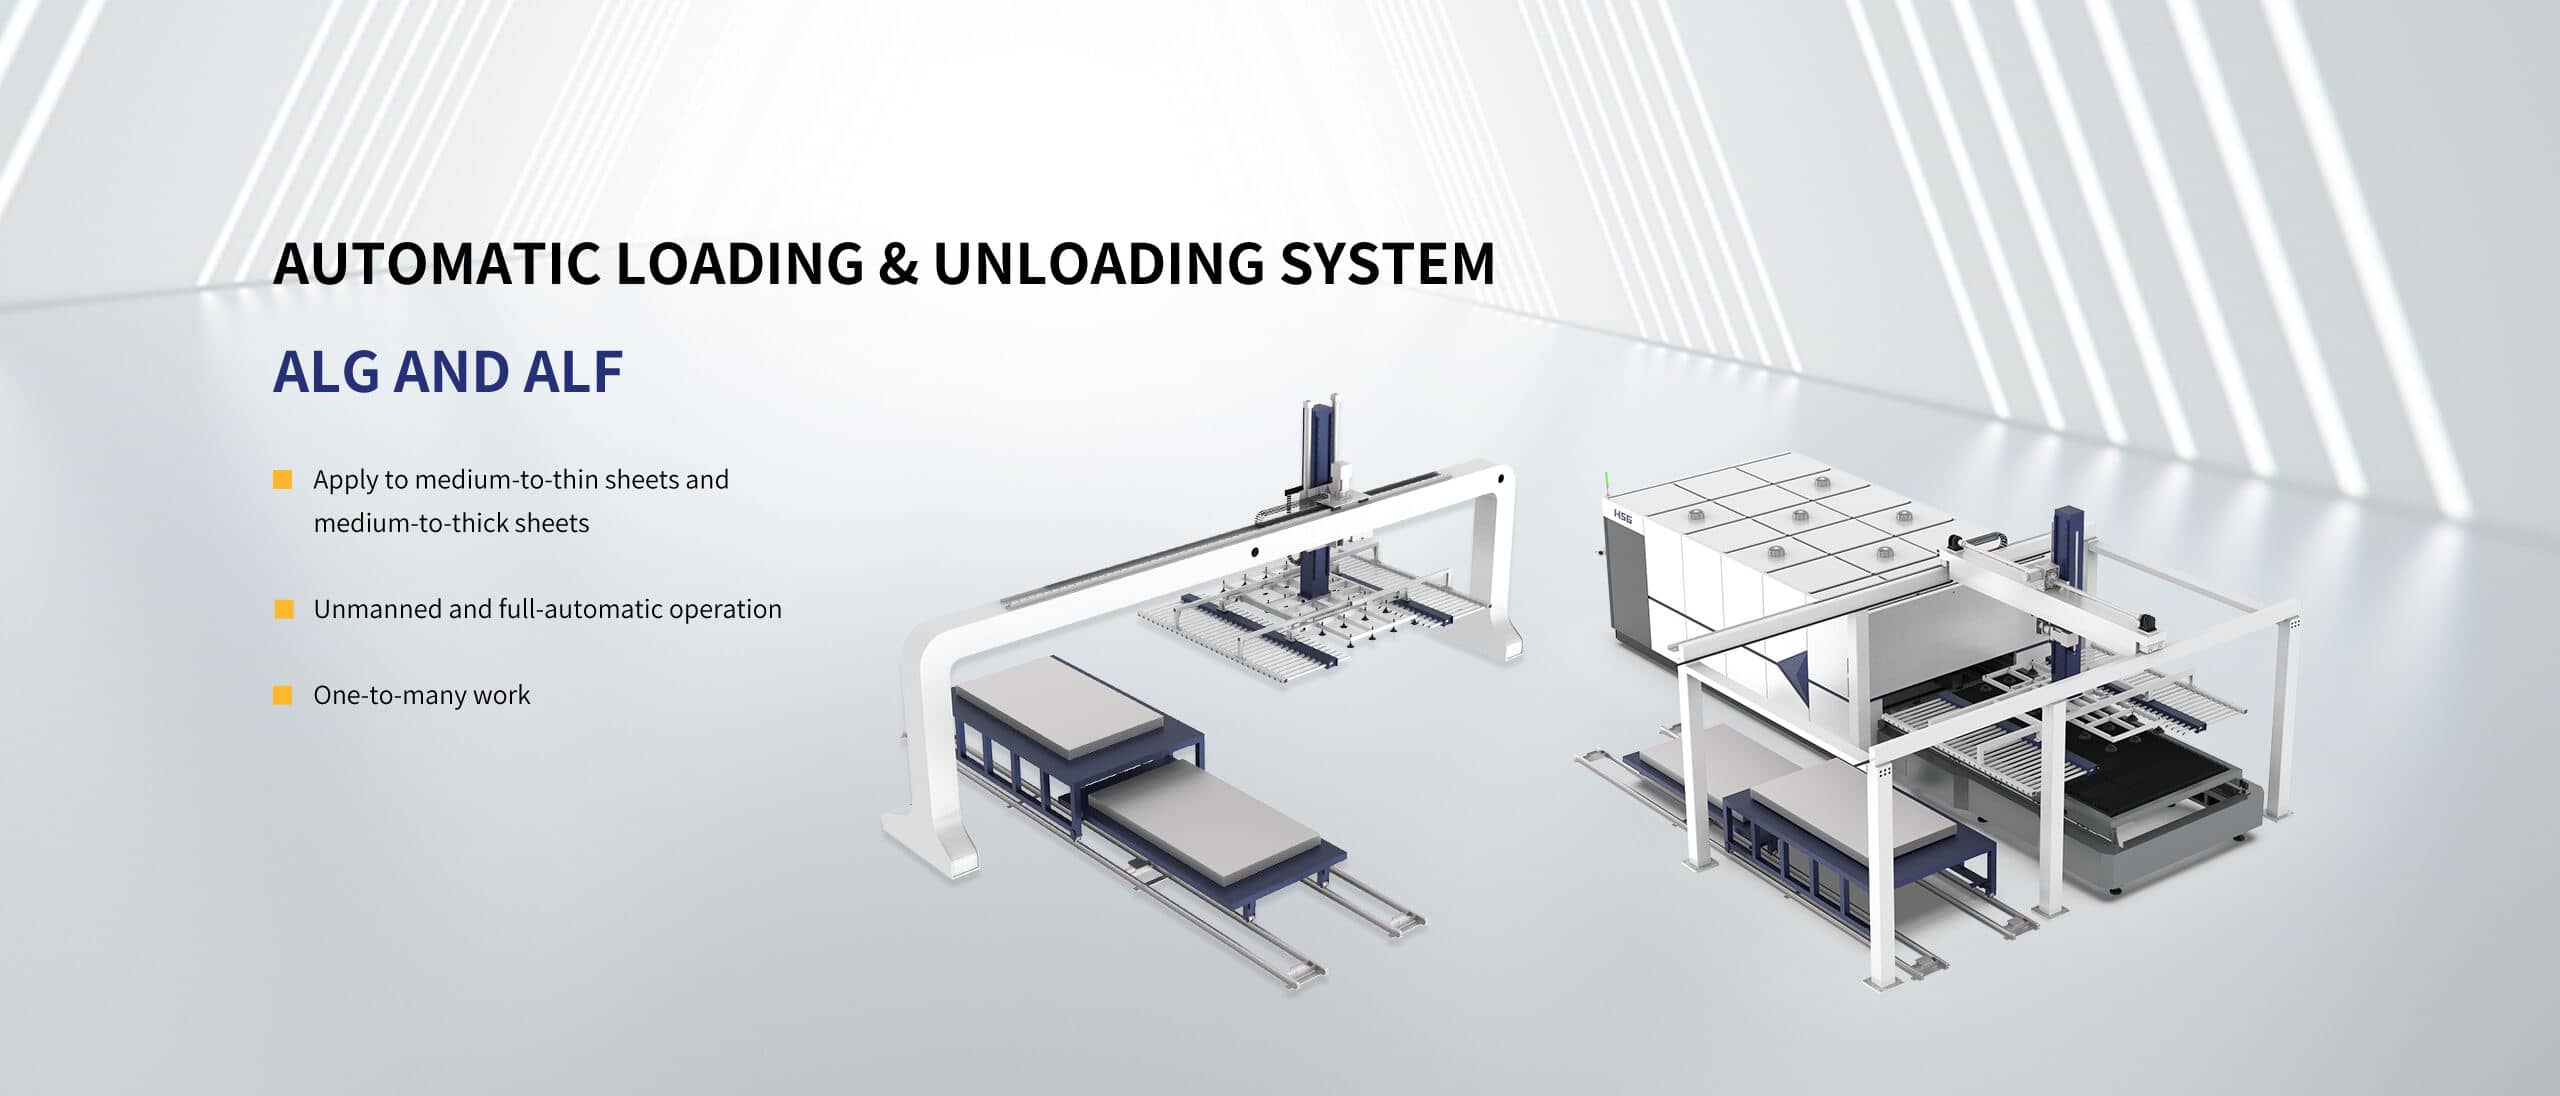 Automatic Loading & Unloading System